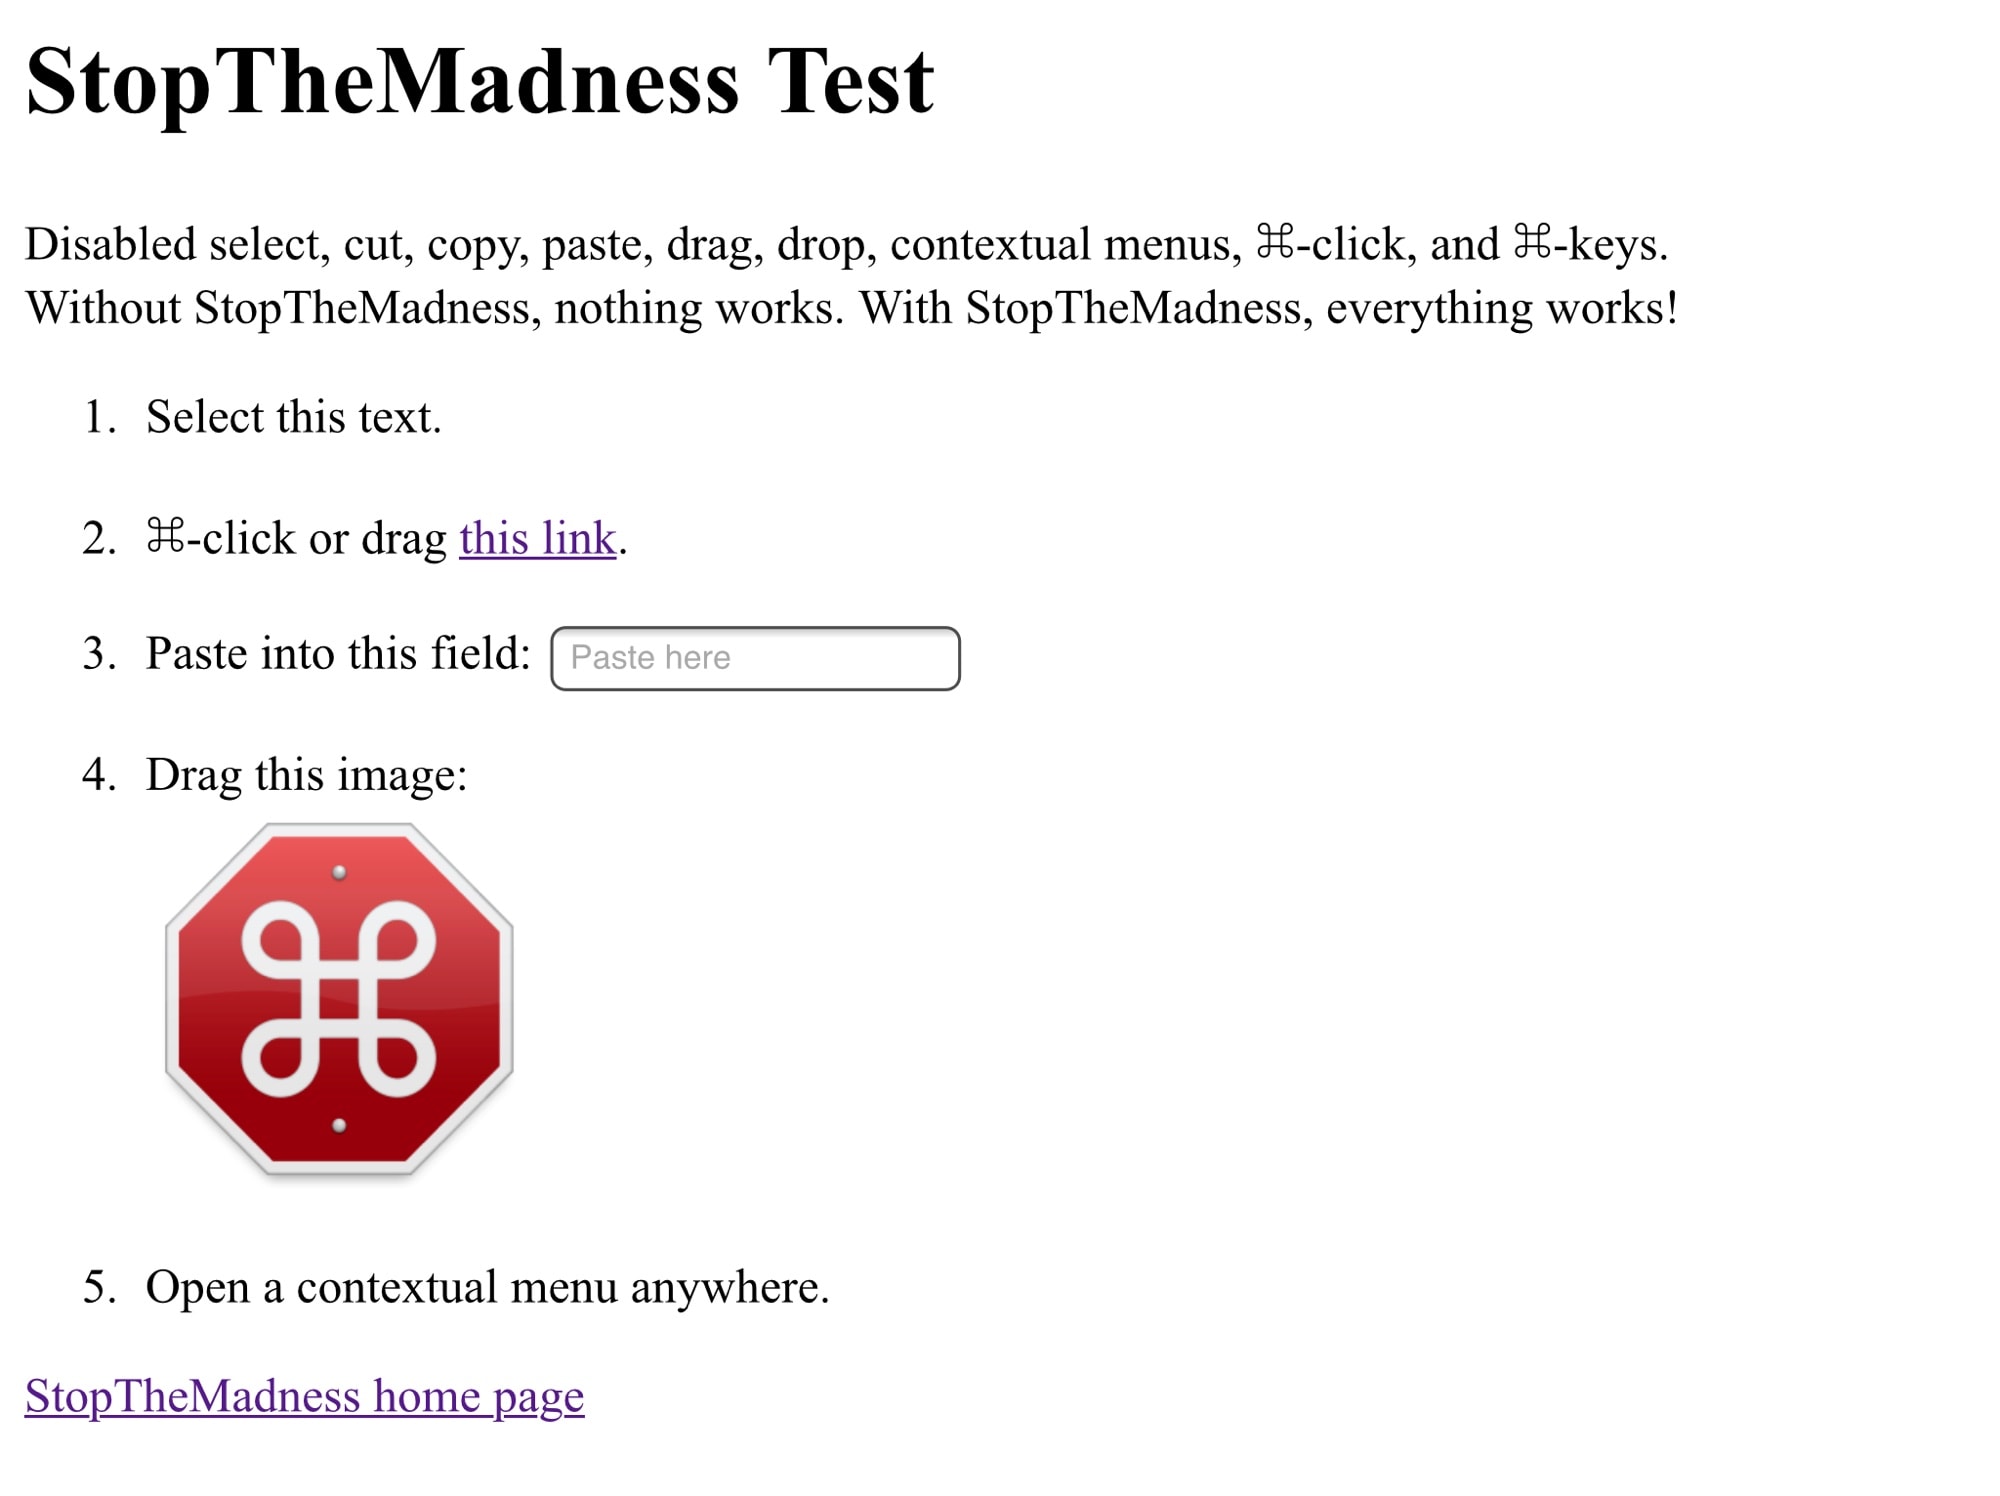 The StopTheMadness test page is a real eye-opener.